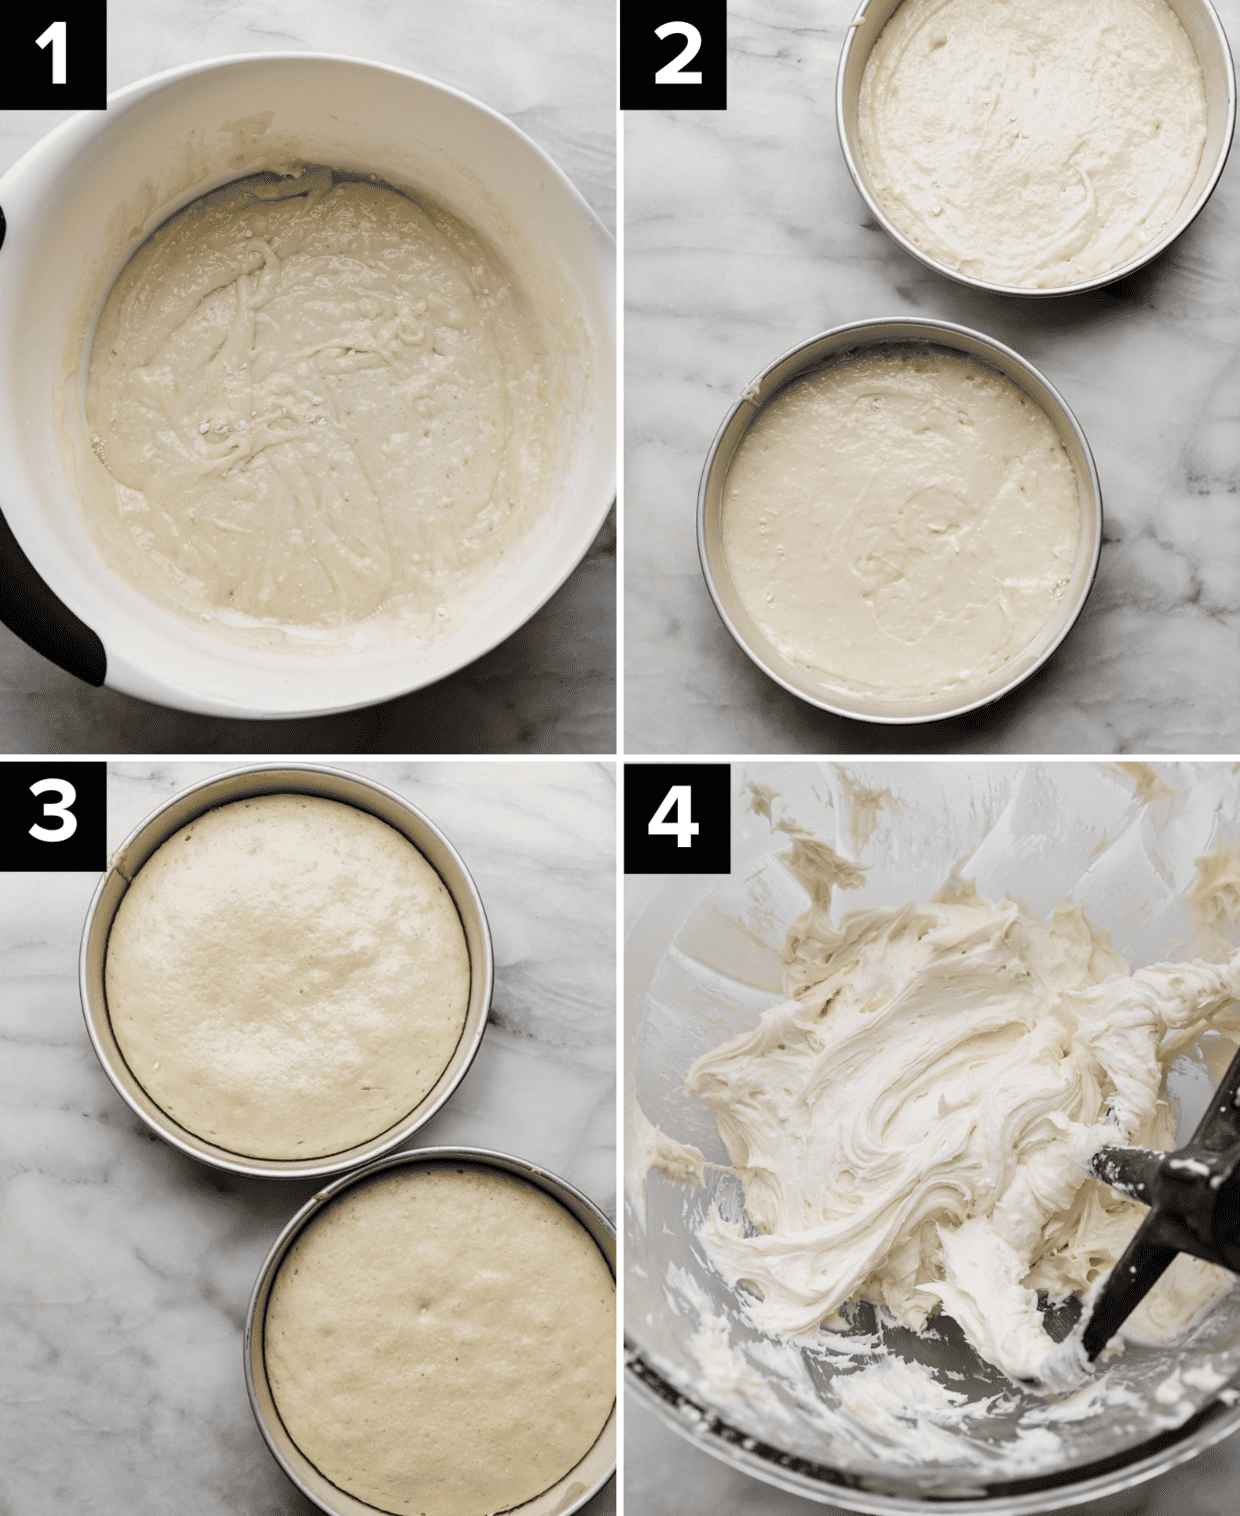 Four photos showing how to make the best Coconut Cake Recipe, top left is coconut cake batter in a white bowl, top right photo is cake batter in 2 round cake pans, bottom left image is baked coconut cakes in cake pans, and bottom right photo is coconut cream frosting in a glass bowl.